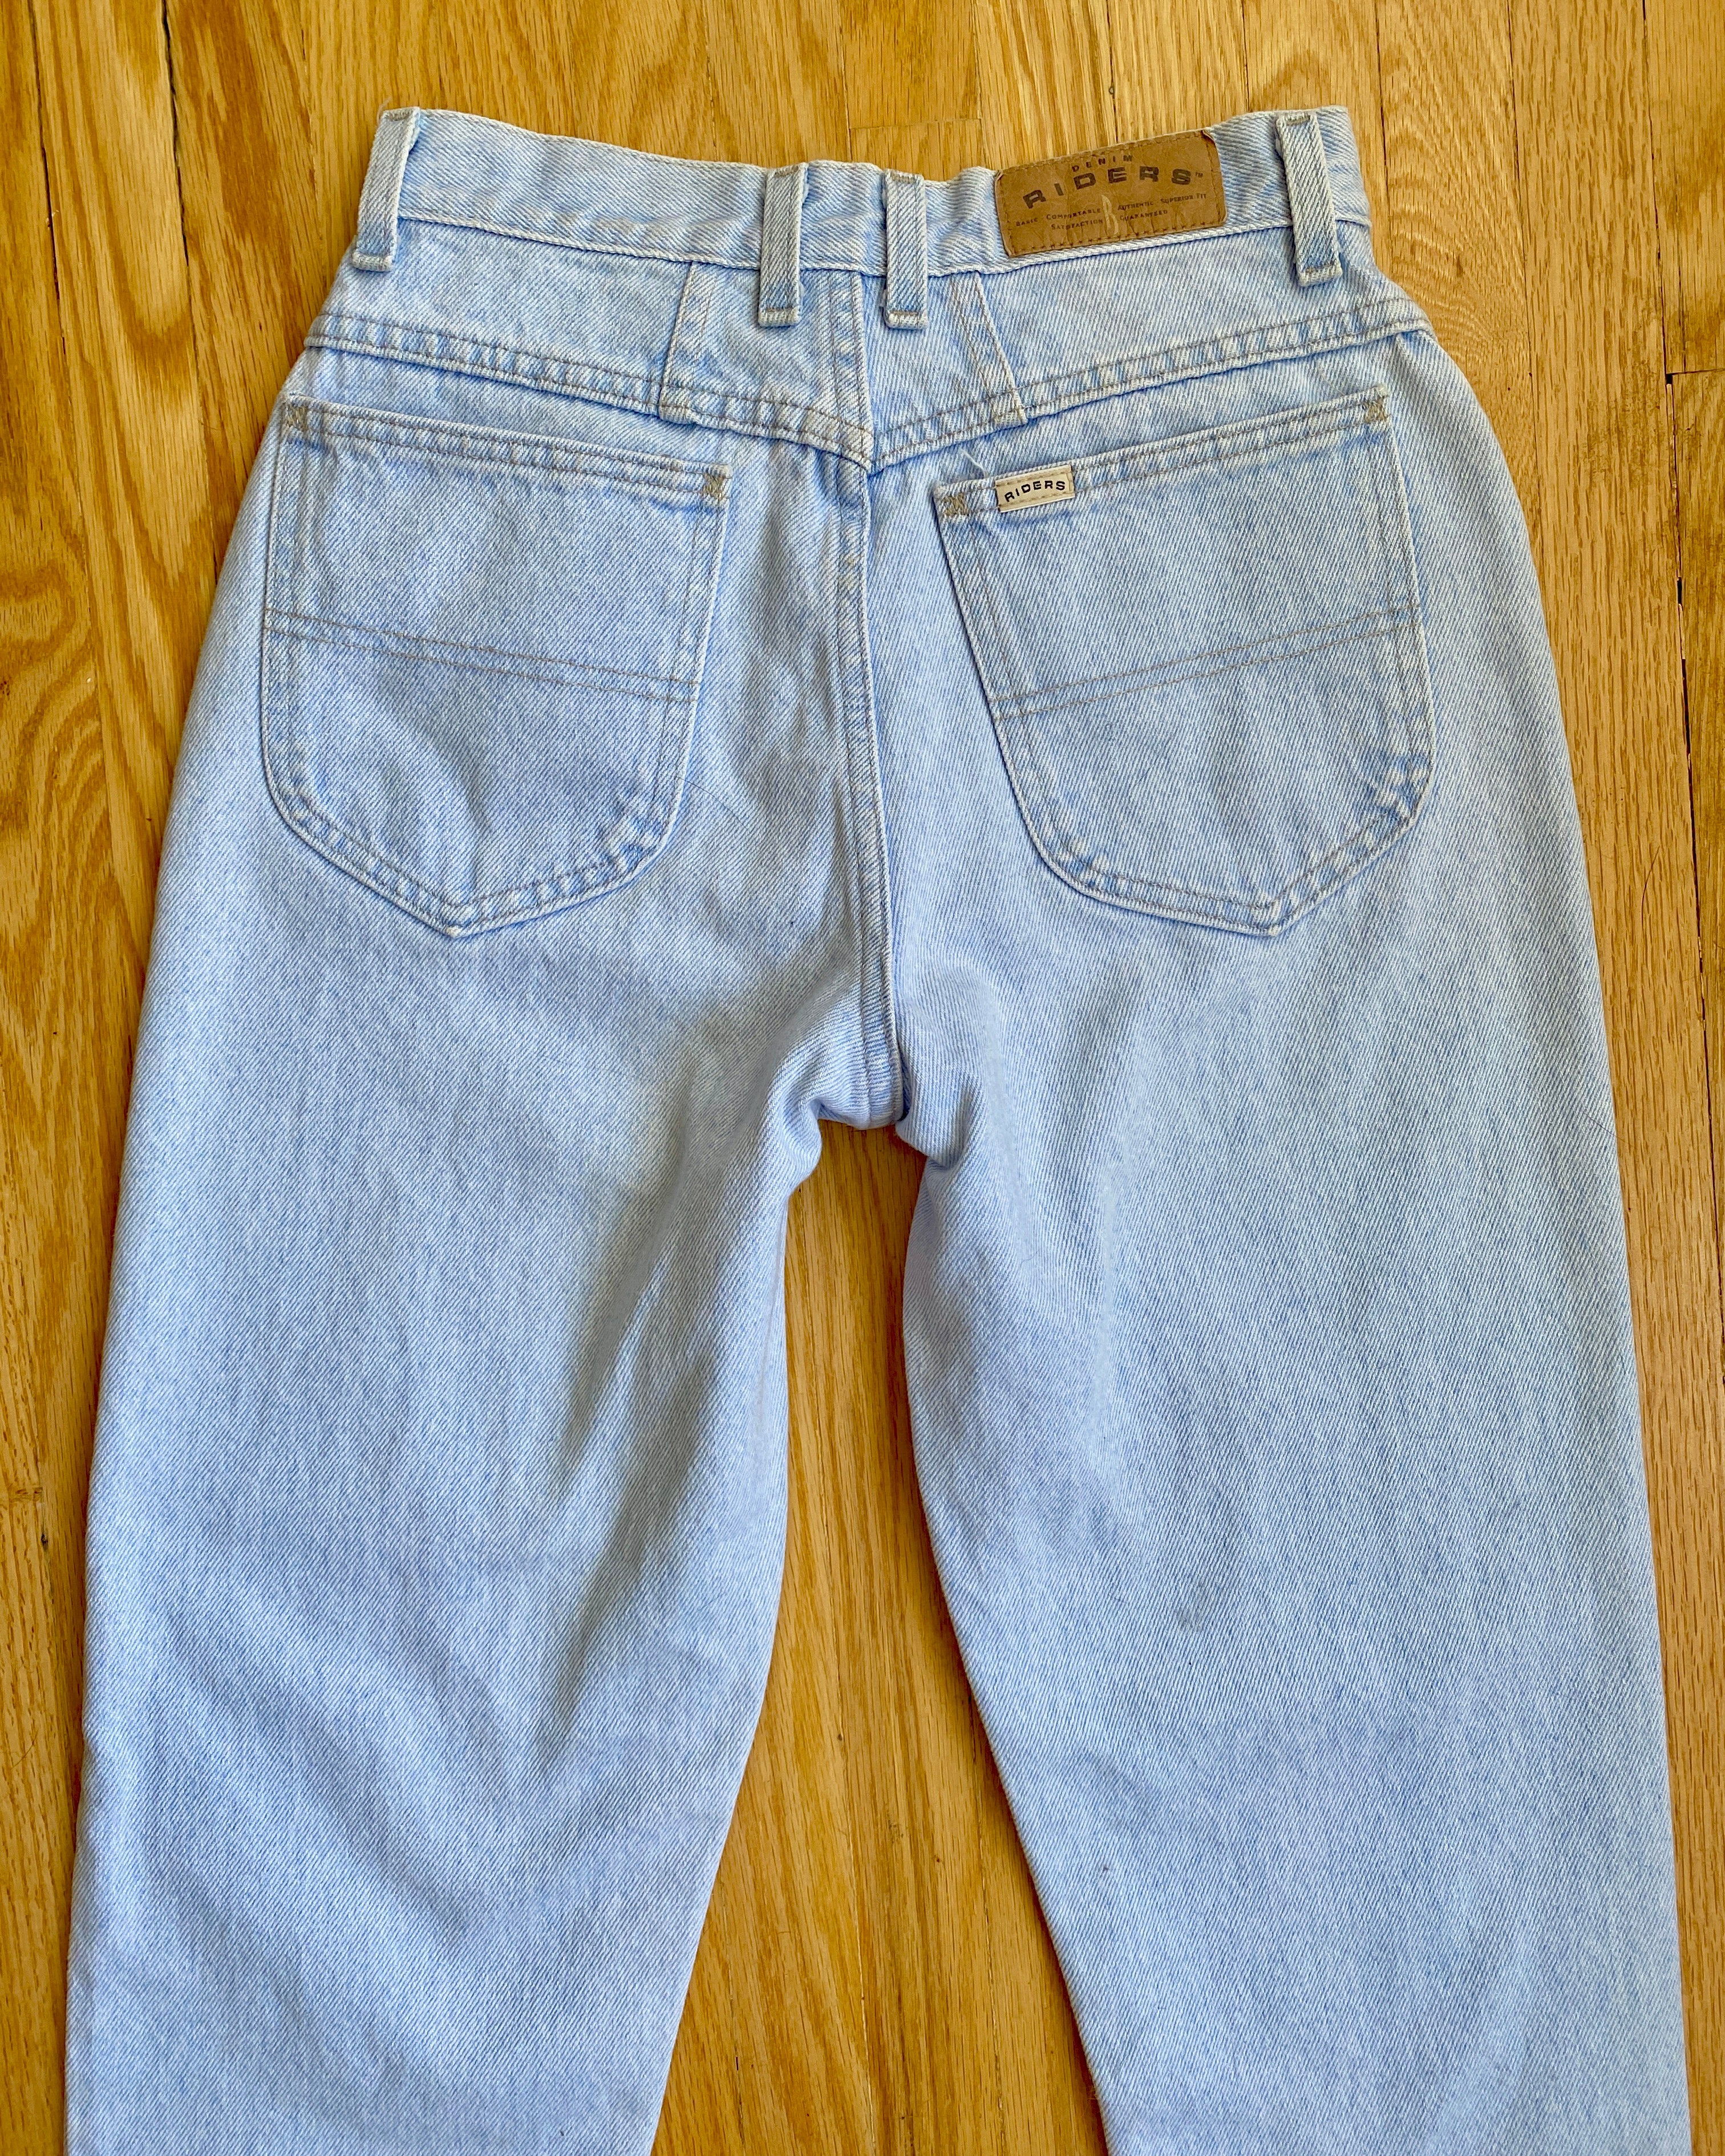 Vintage Riders Light Wash Jeans size 26 or 27 USA